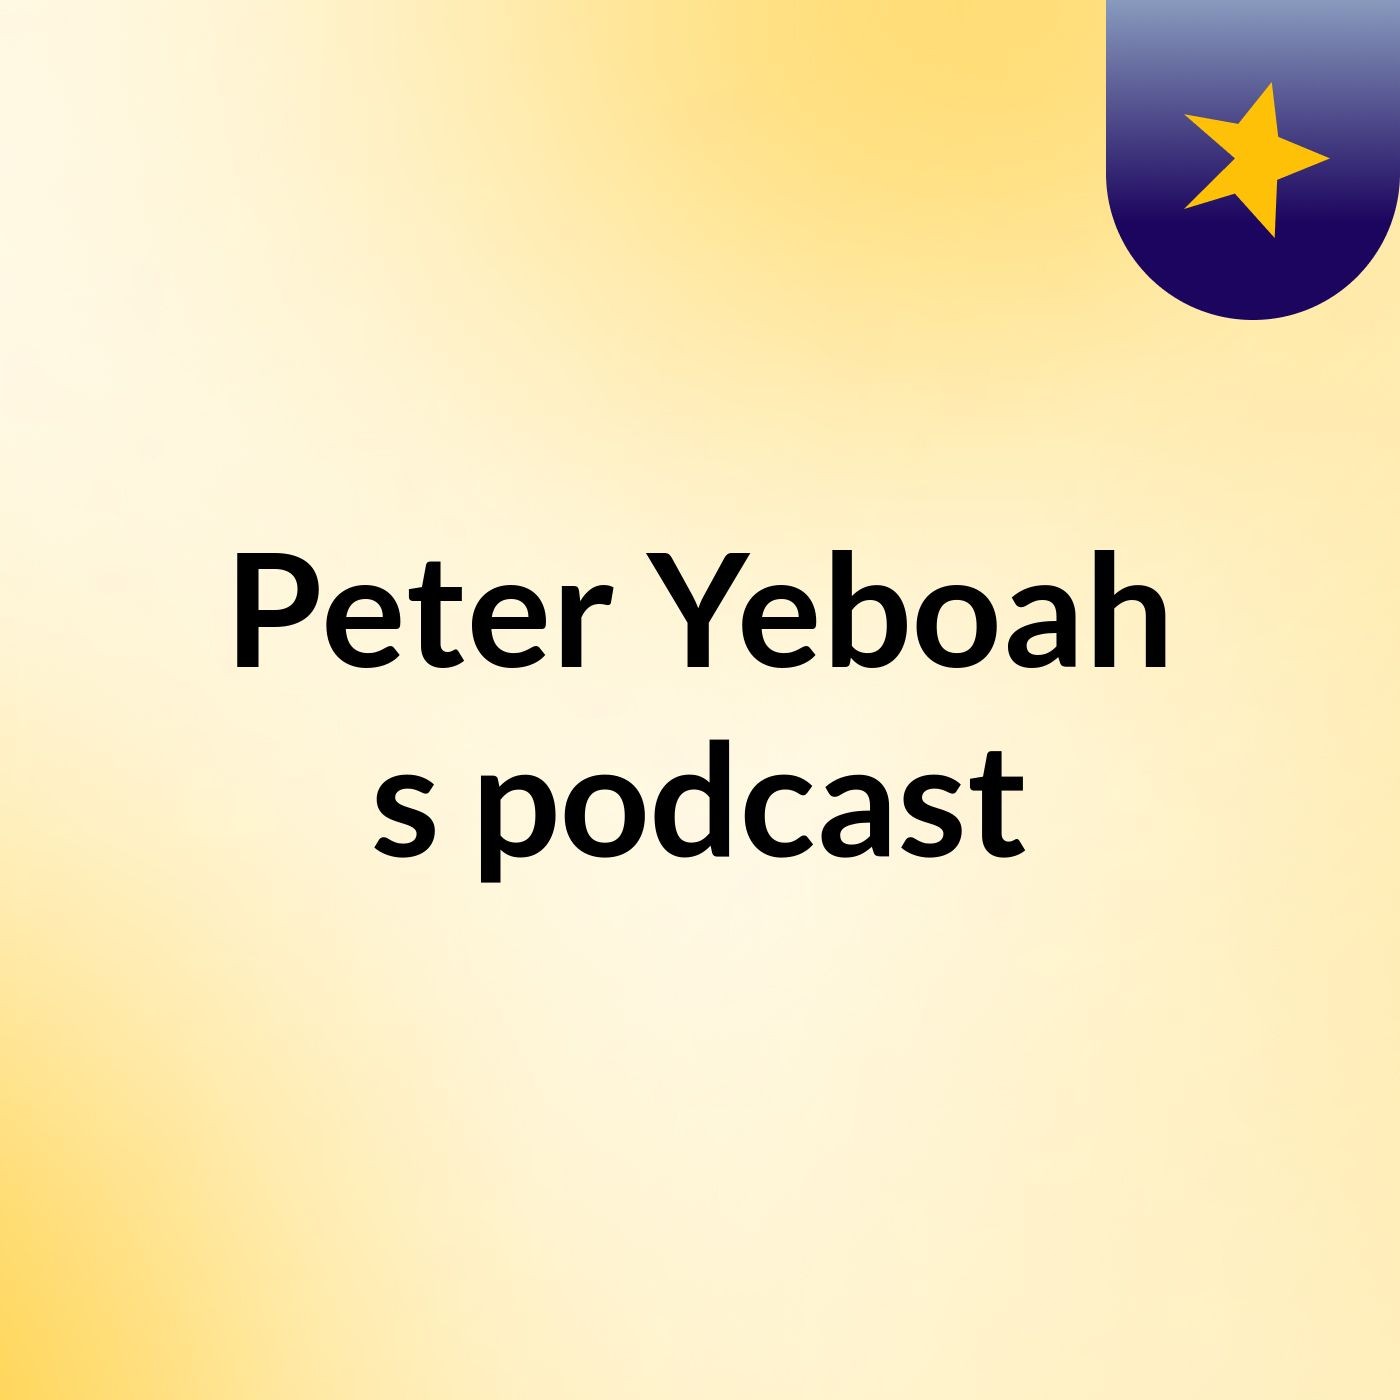 Episode 4 - Peter Yeboah's podcast